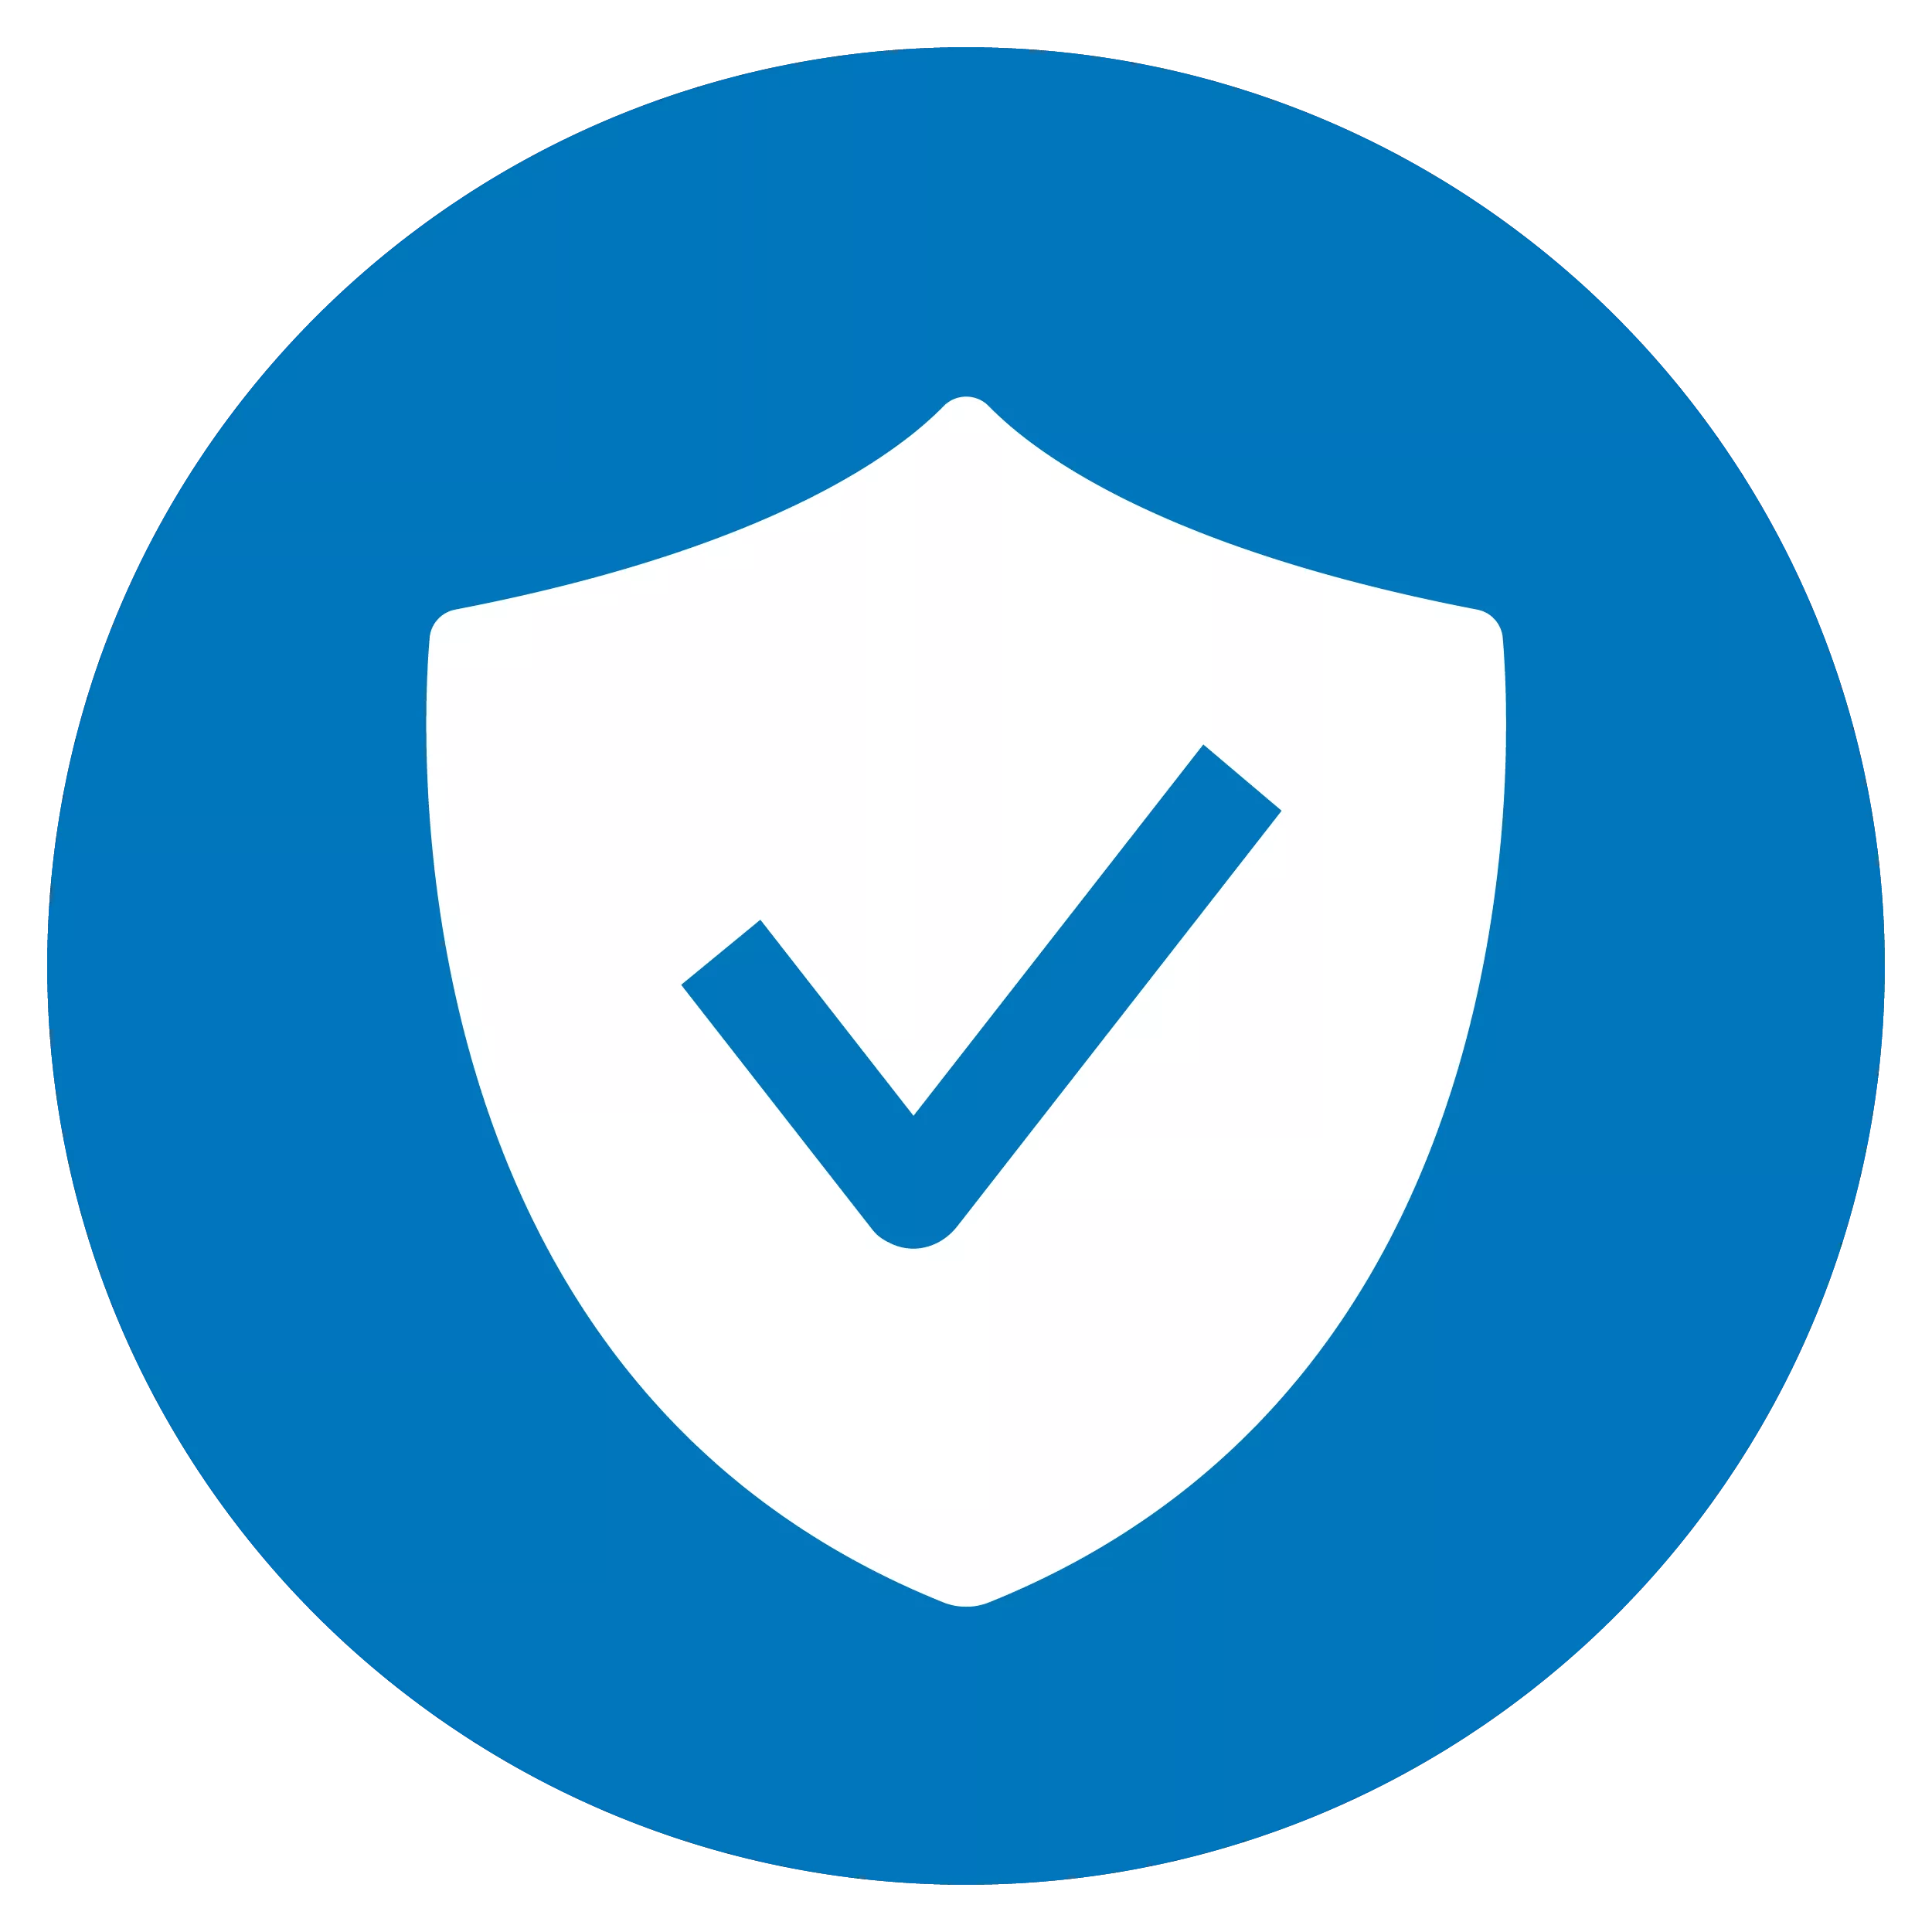 Product Safety Logo - Shield on Blue